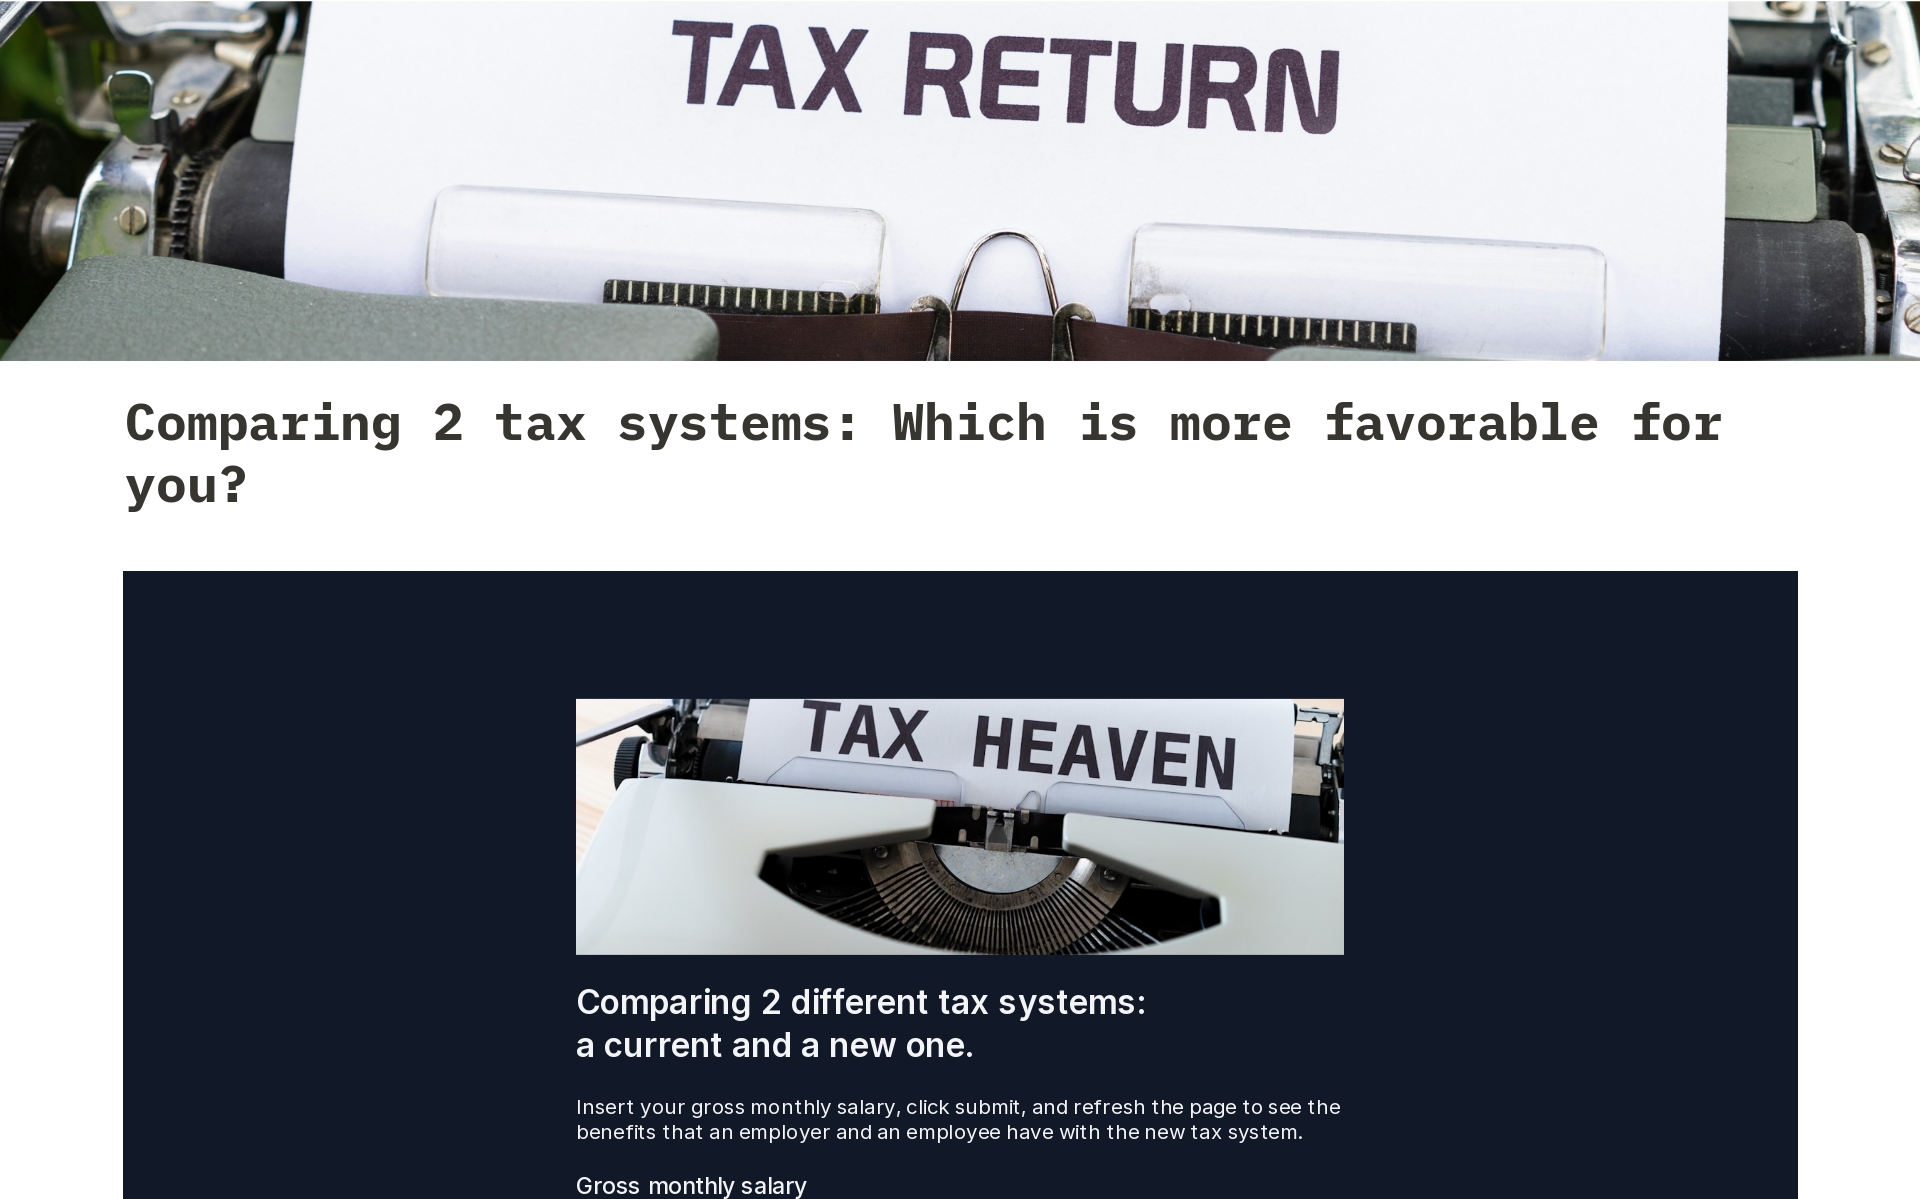 Comparing 2 tax systems: a current and a new oneのテンプレートのプレビュー